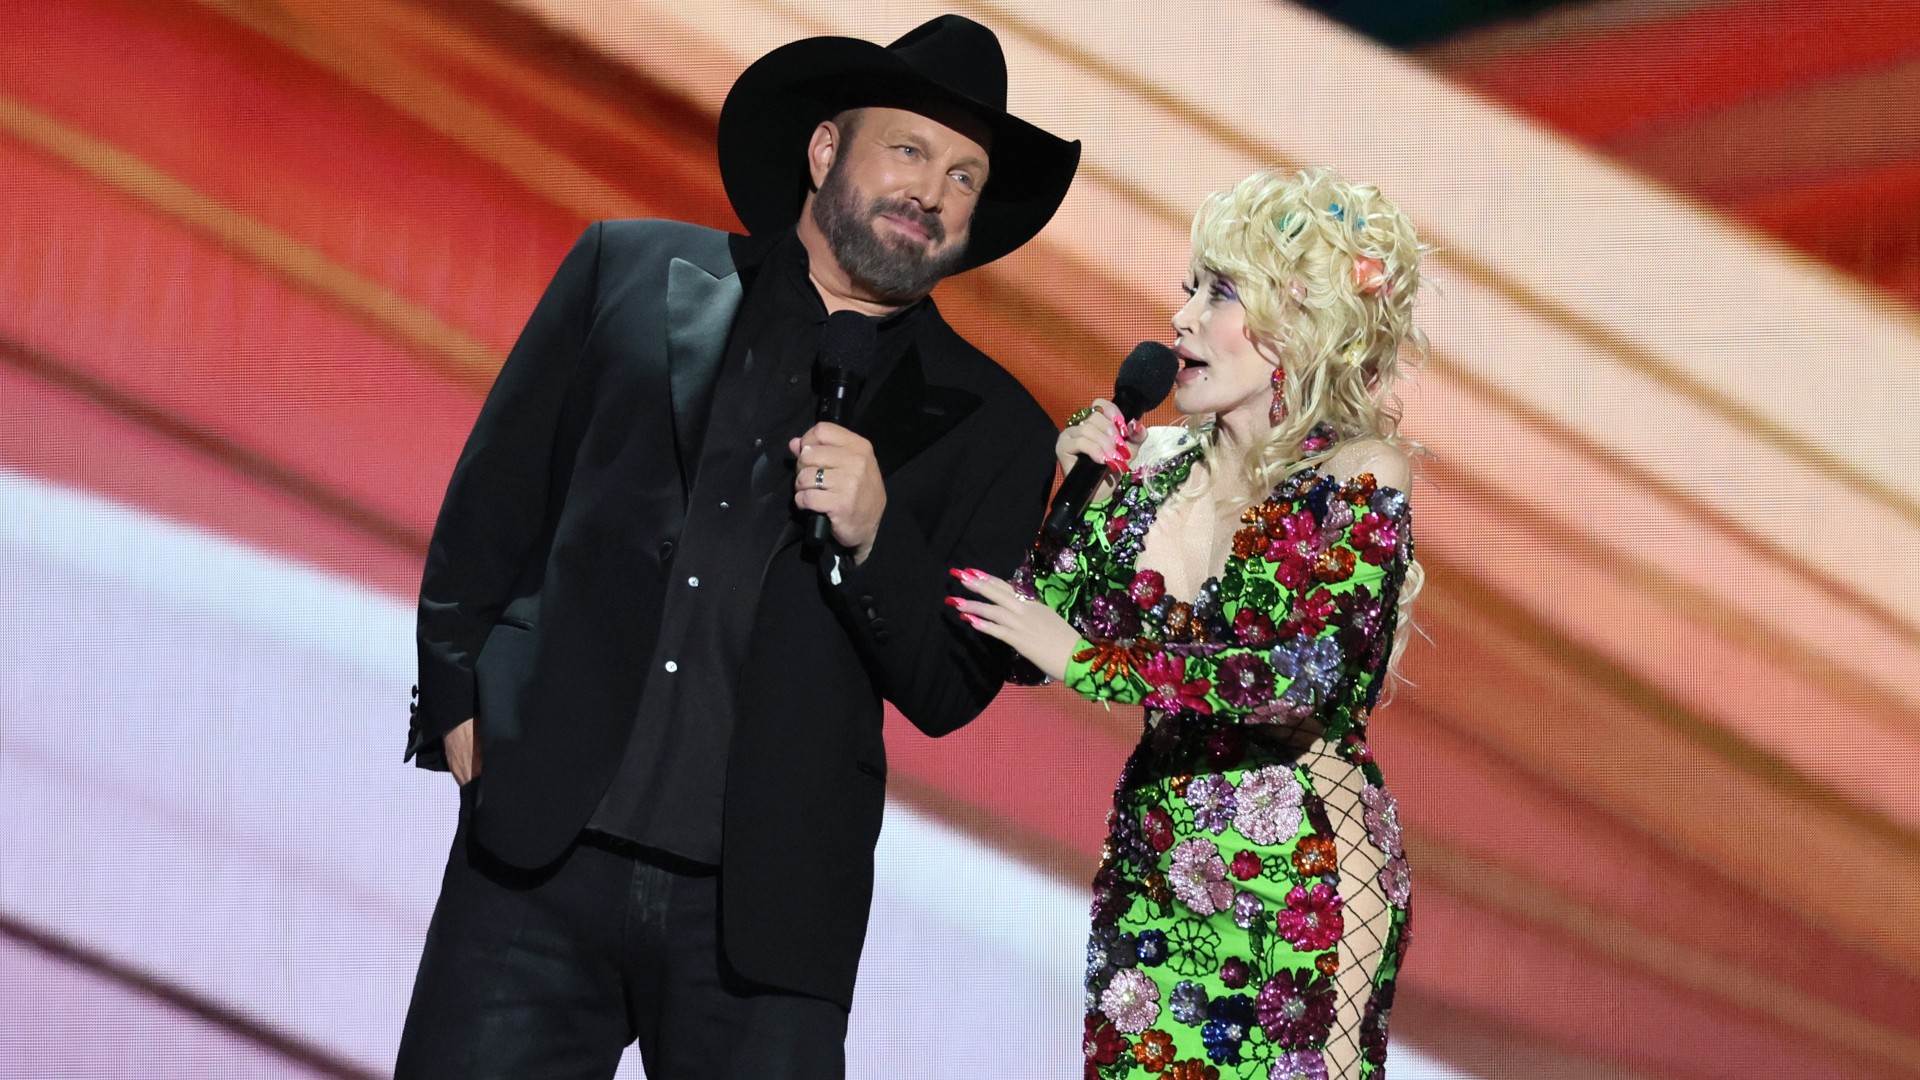 Dolly Parton jokes about Garth Brooks and Trisha Yearwood in threesome at ACM Awards.